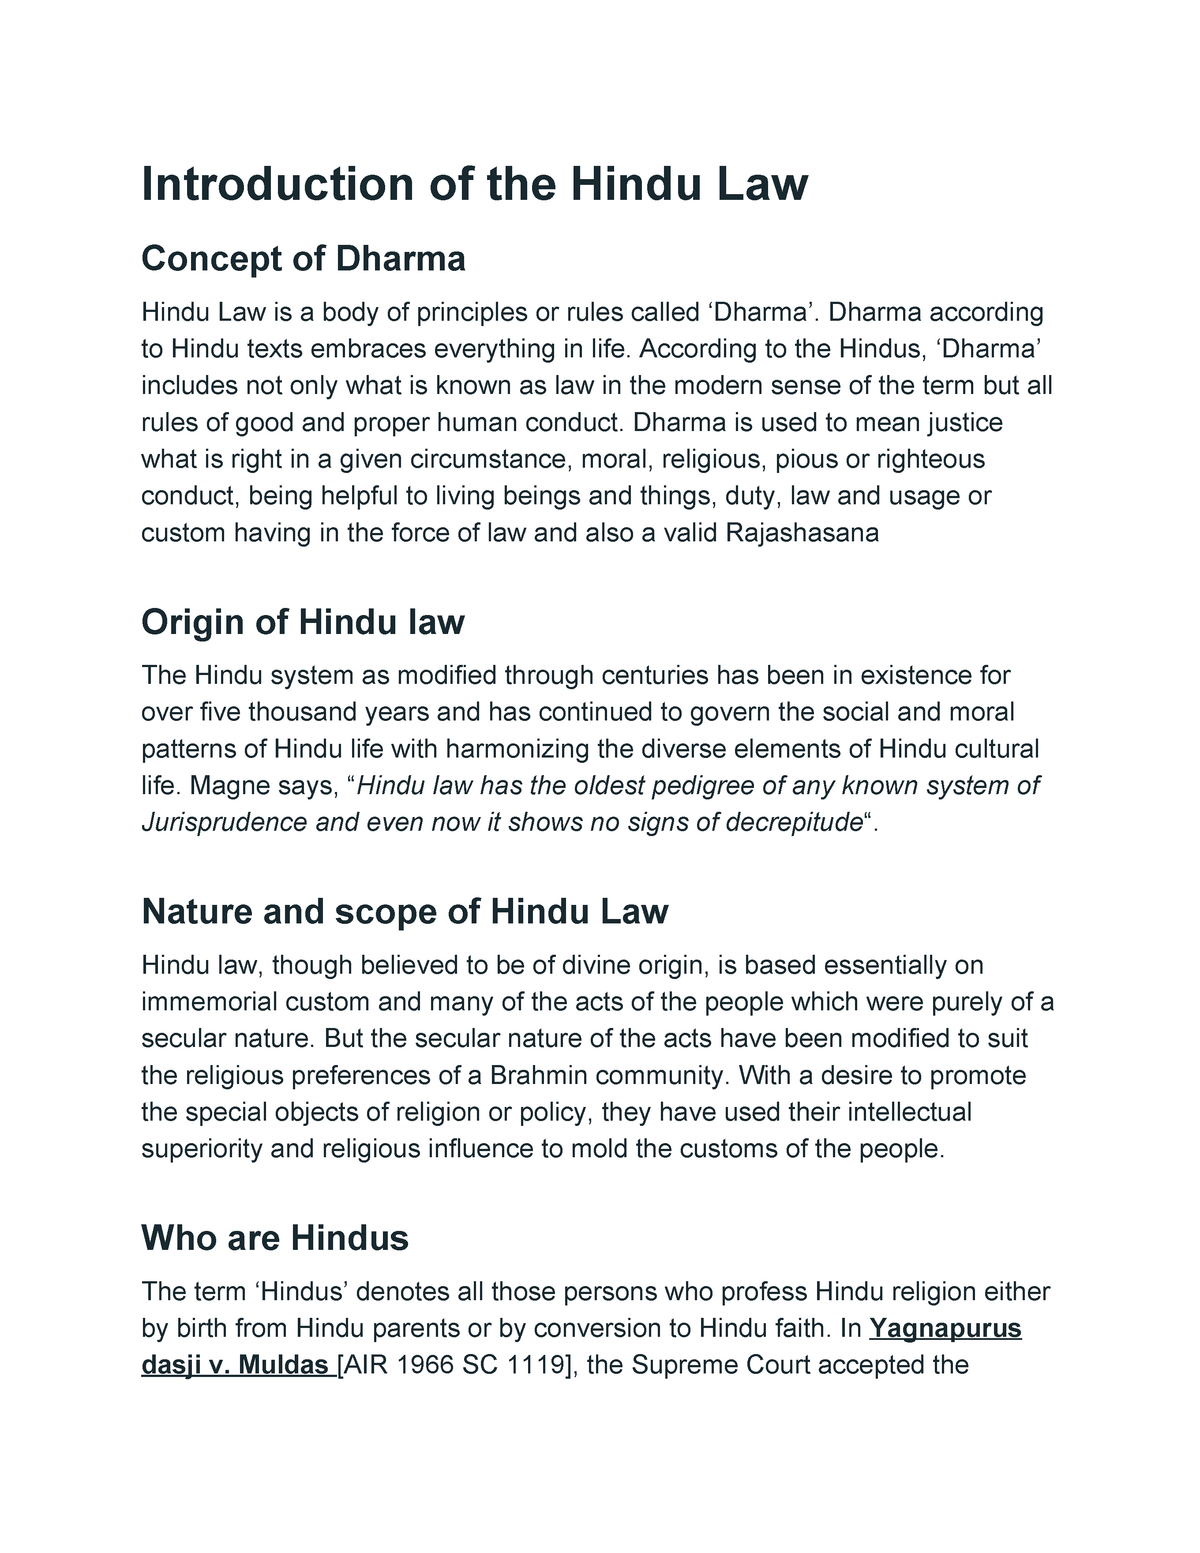 hindu law topics for research paper